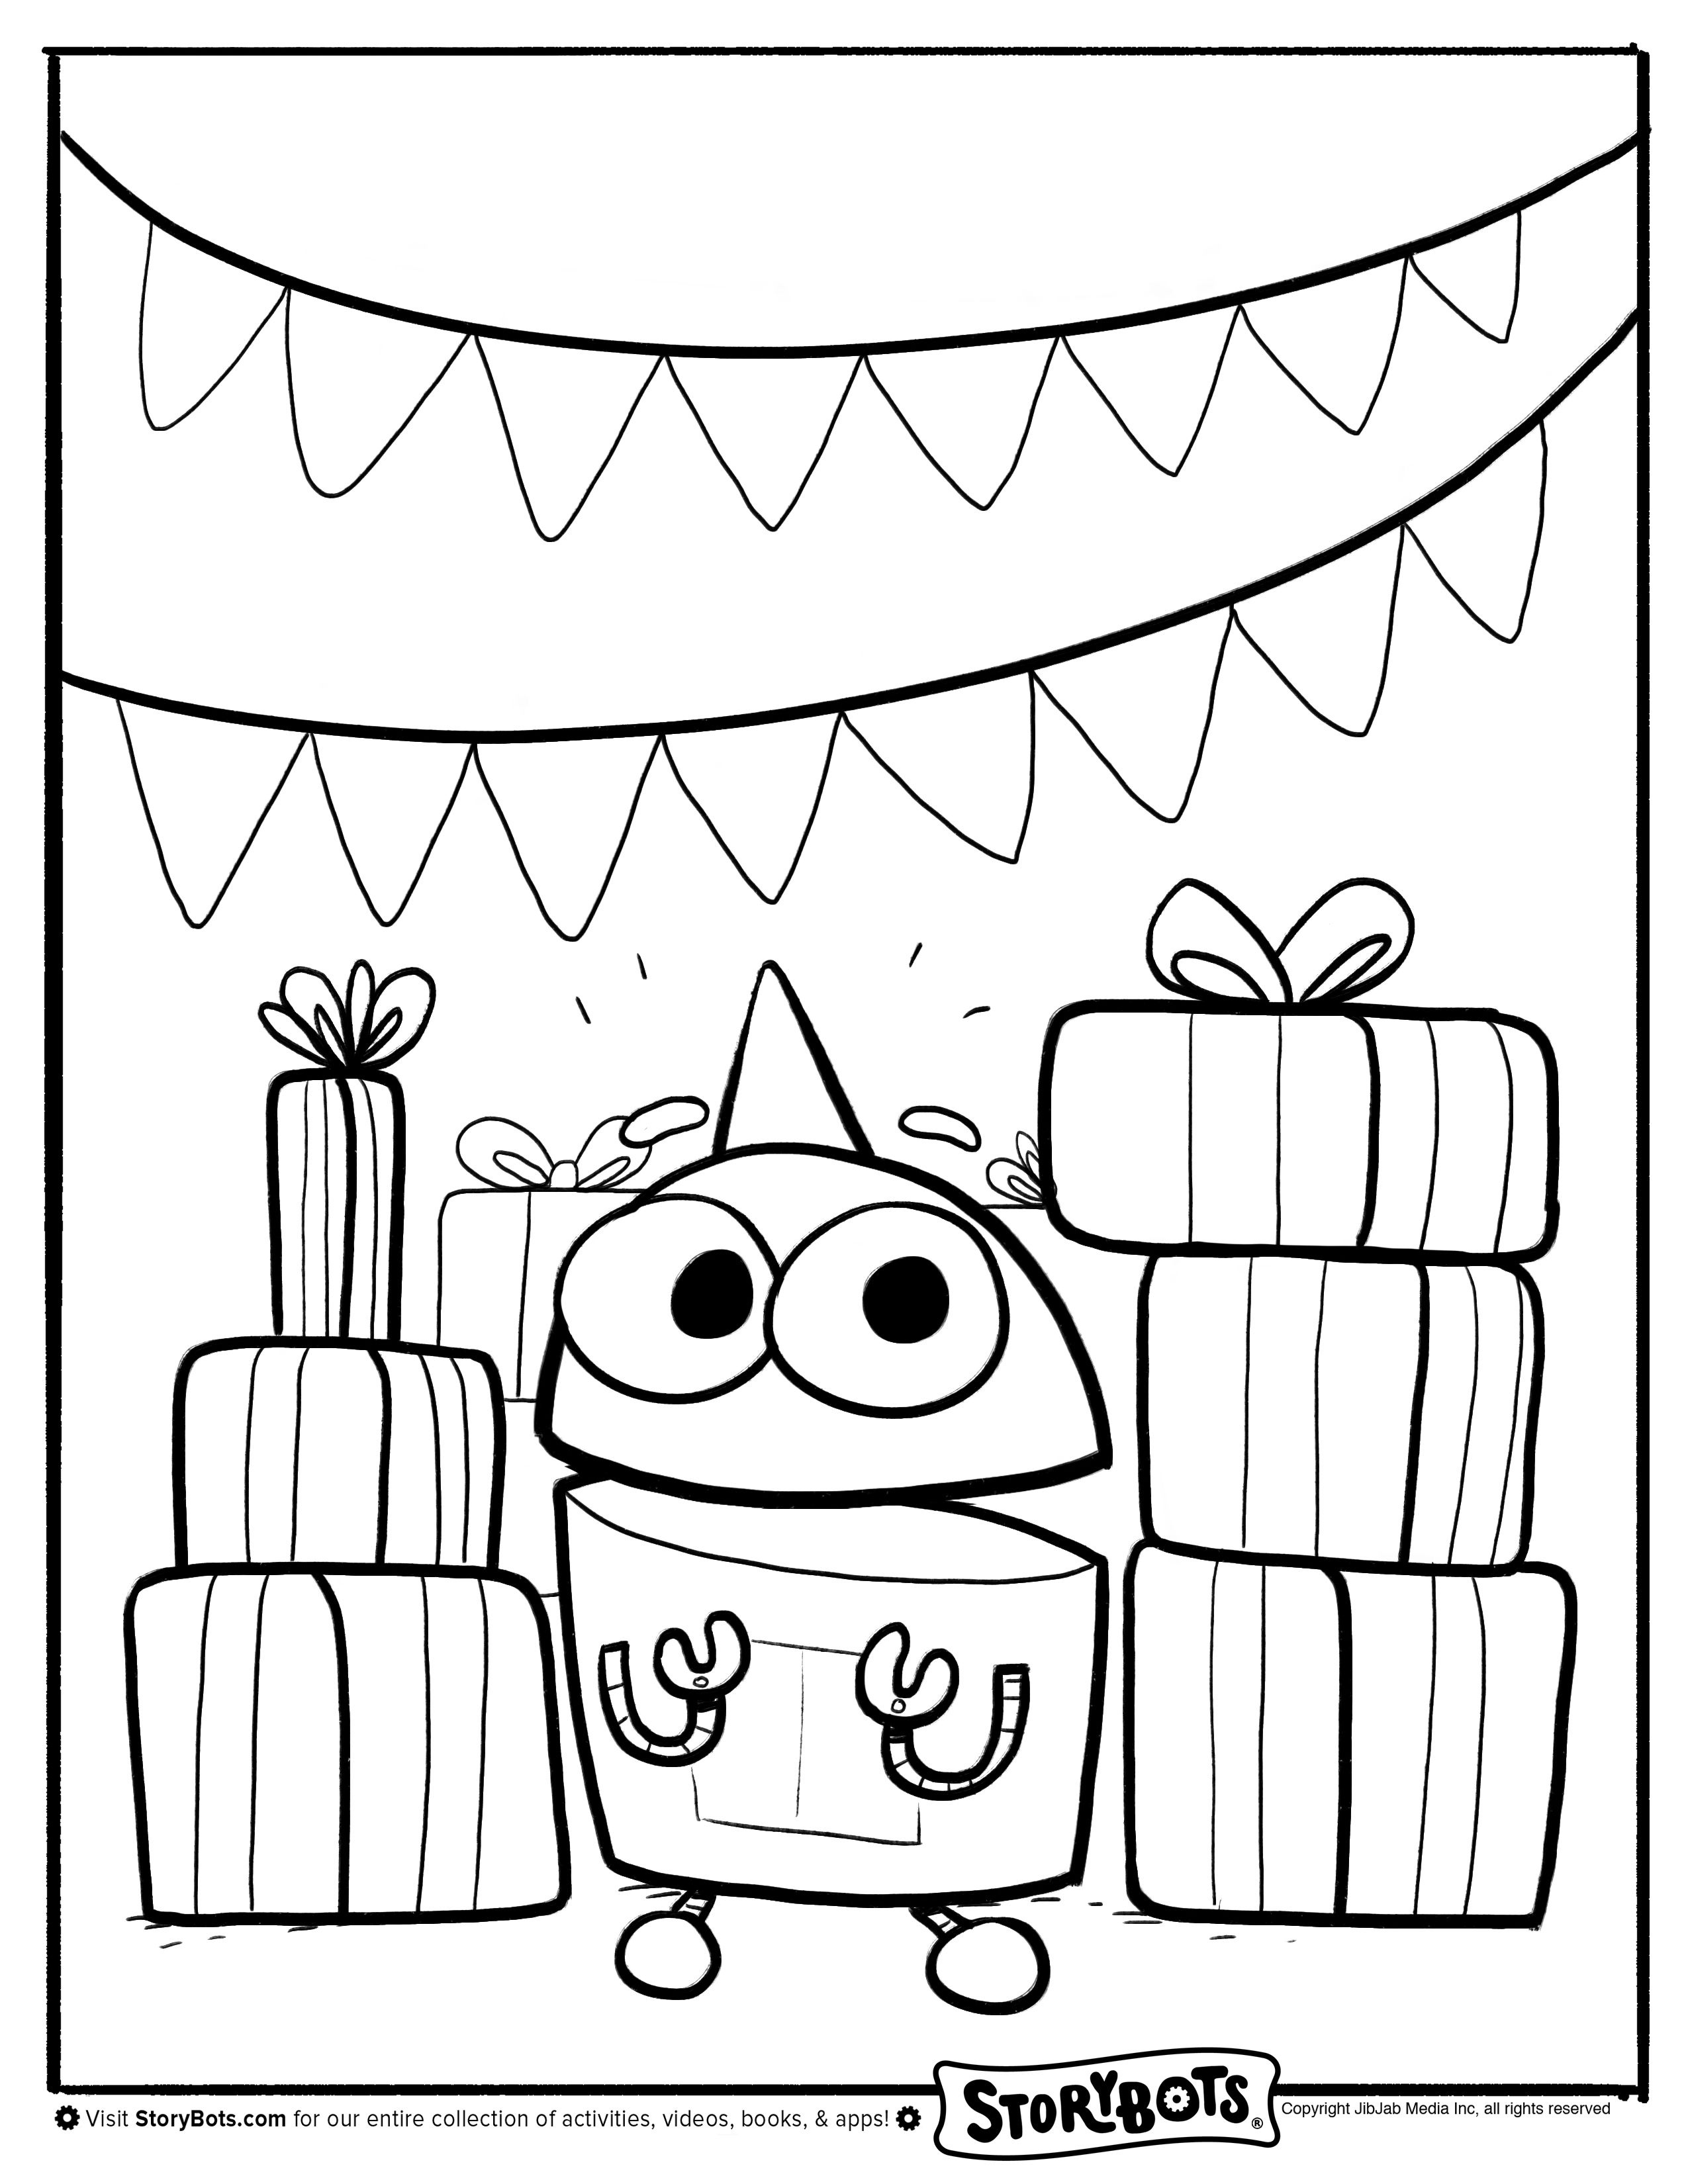 StoryBots Coloring Pages to Print (Page 1) - Line.17QQ.com